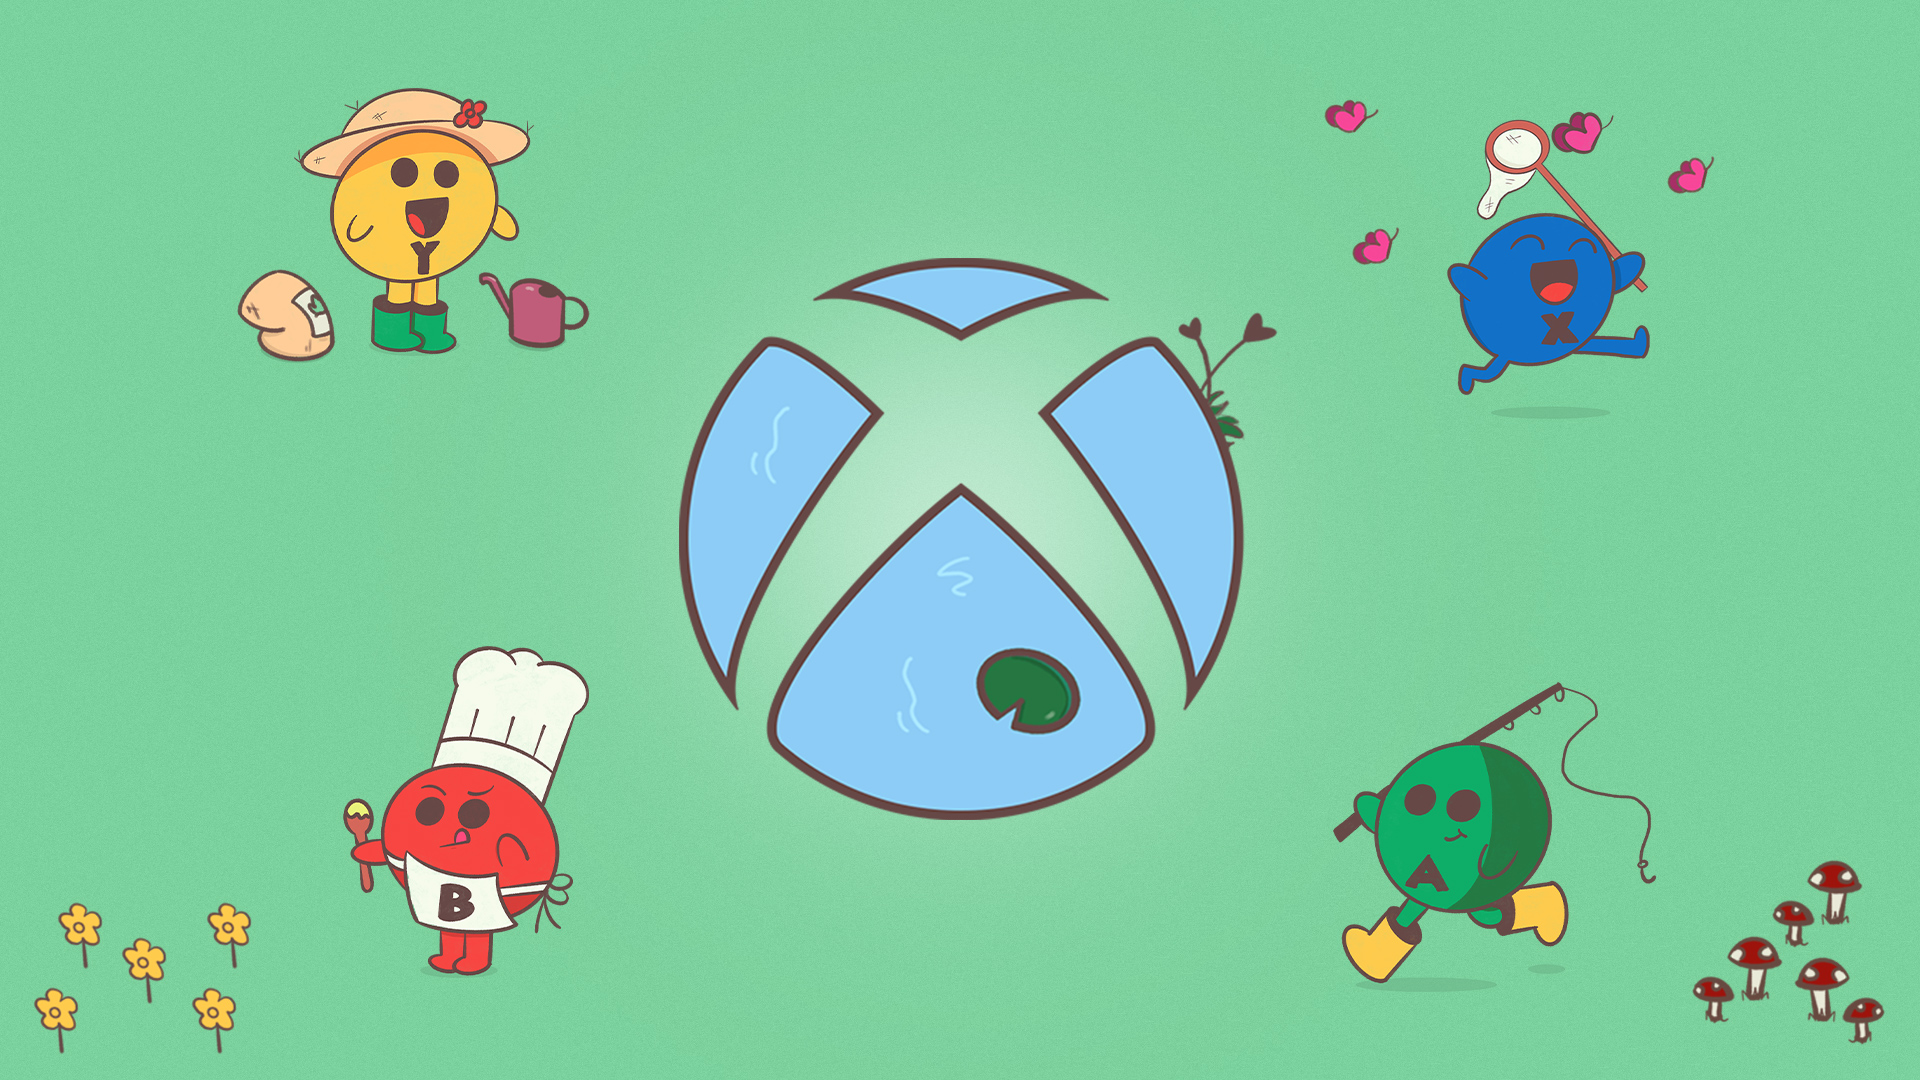 Xbox Sphere in a cartoon style in a blue pond background, a green lily pad in the bottom petal, and reeds in the top right petal. The sphere is surrounded by four button characters. The red “B” button is wearing a white chef hat and holding a wooden spoon, the yellow Y button has a bag of soil and a watering can, the blue “X” button is chasing pink butterflies with a net, and the green “A” button is holding a fishing pole.